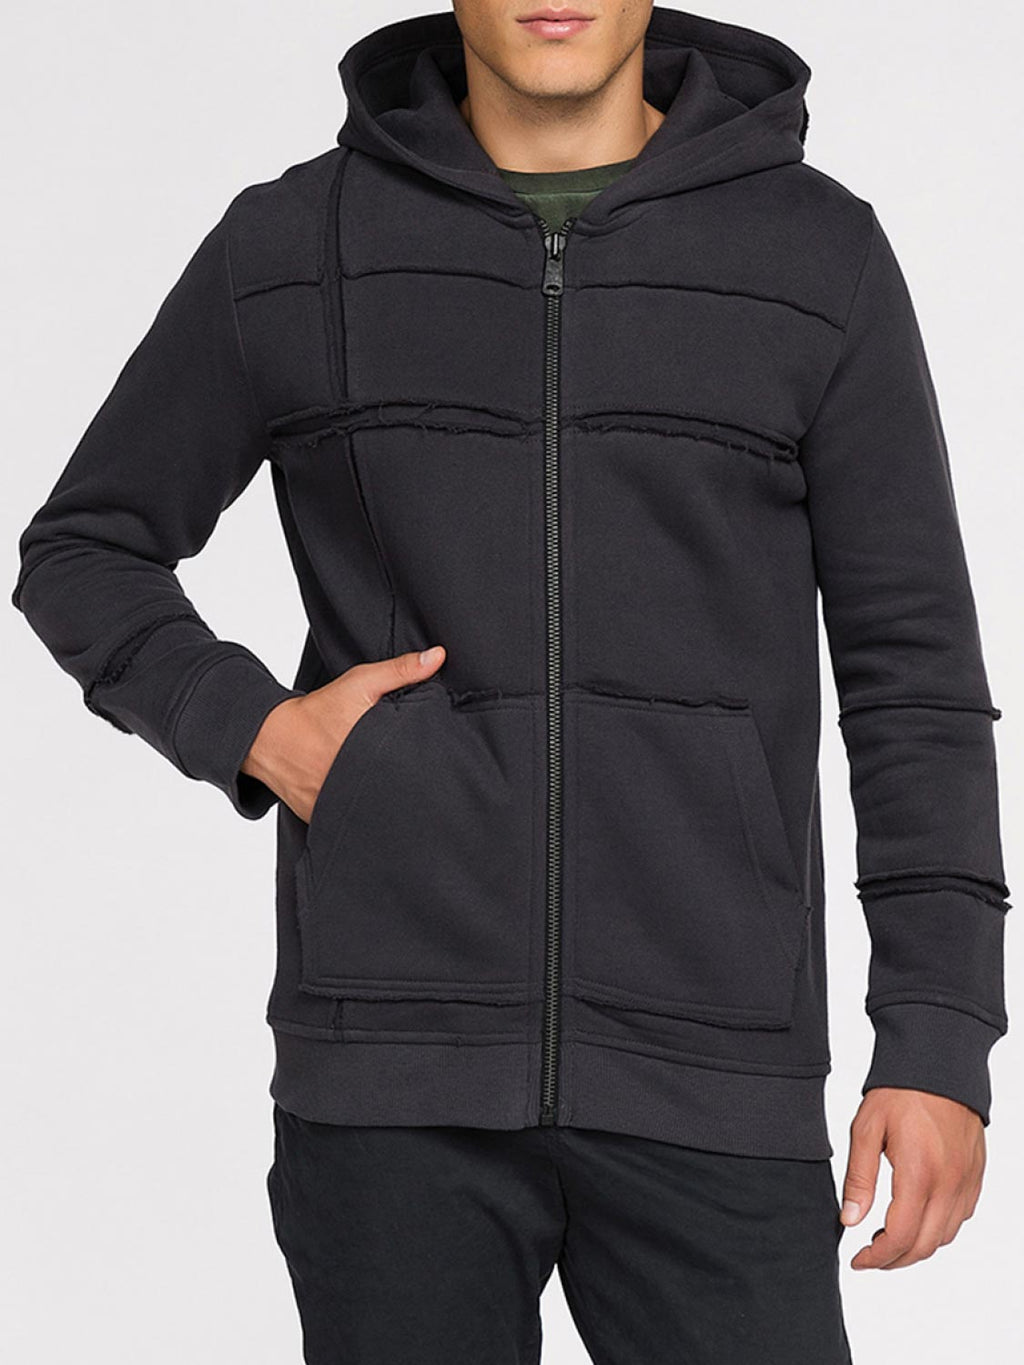 Organic Cotton Laser Cut Zip Up Hoodie Charcoal Grey | The Project Garments - B